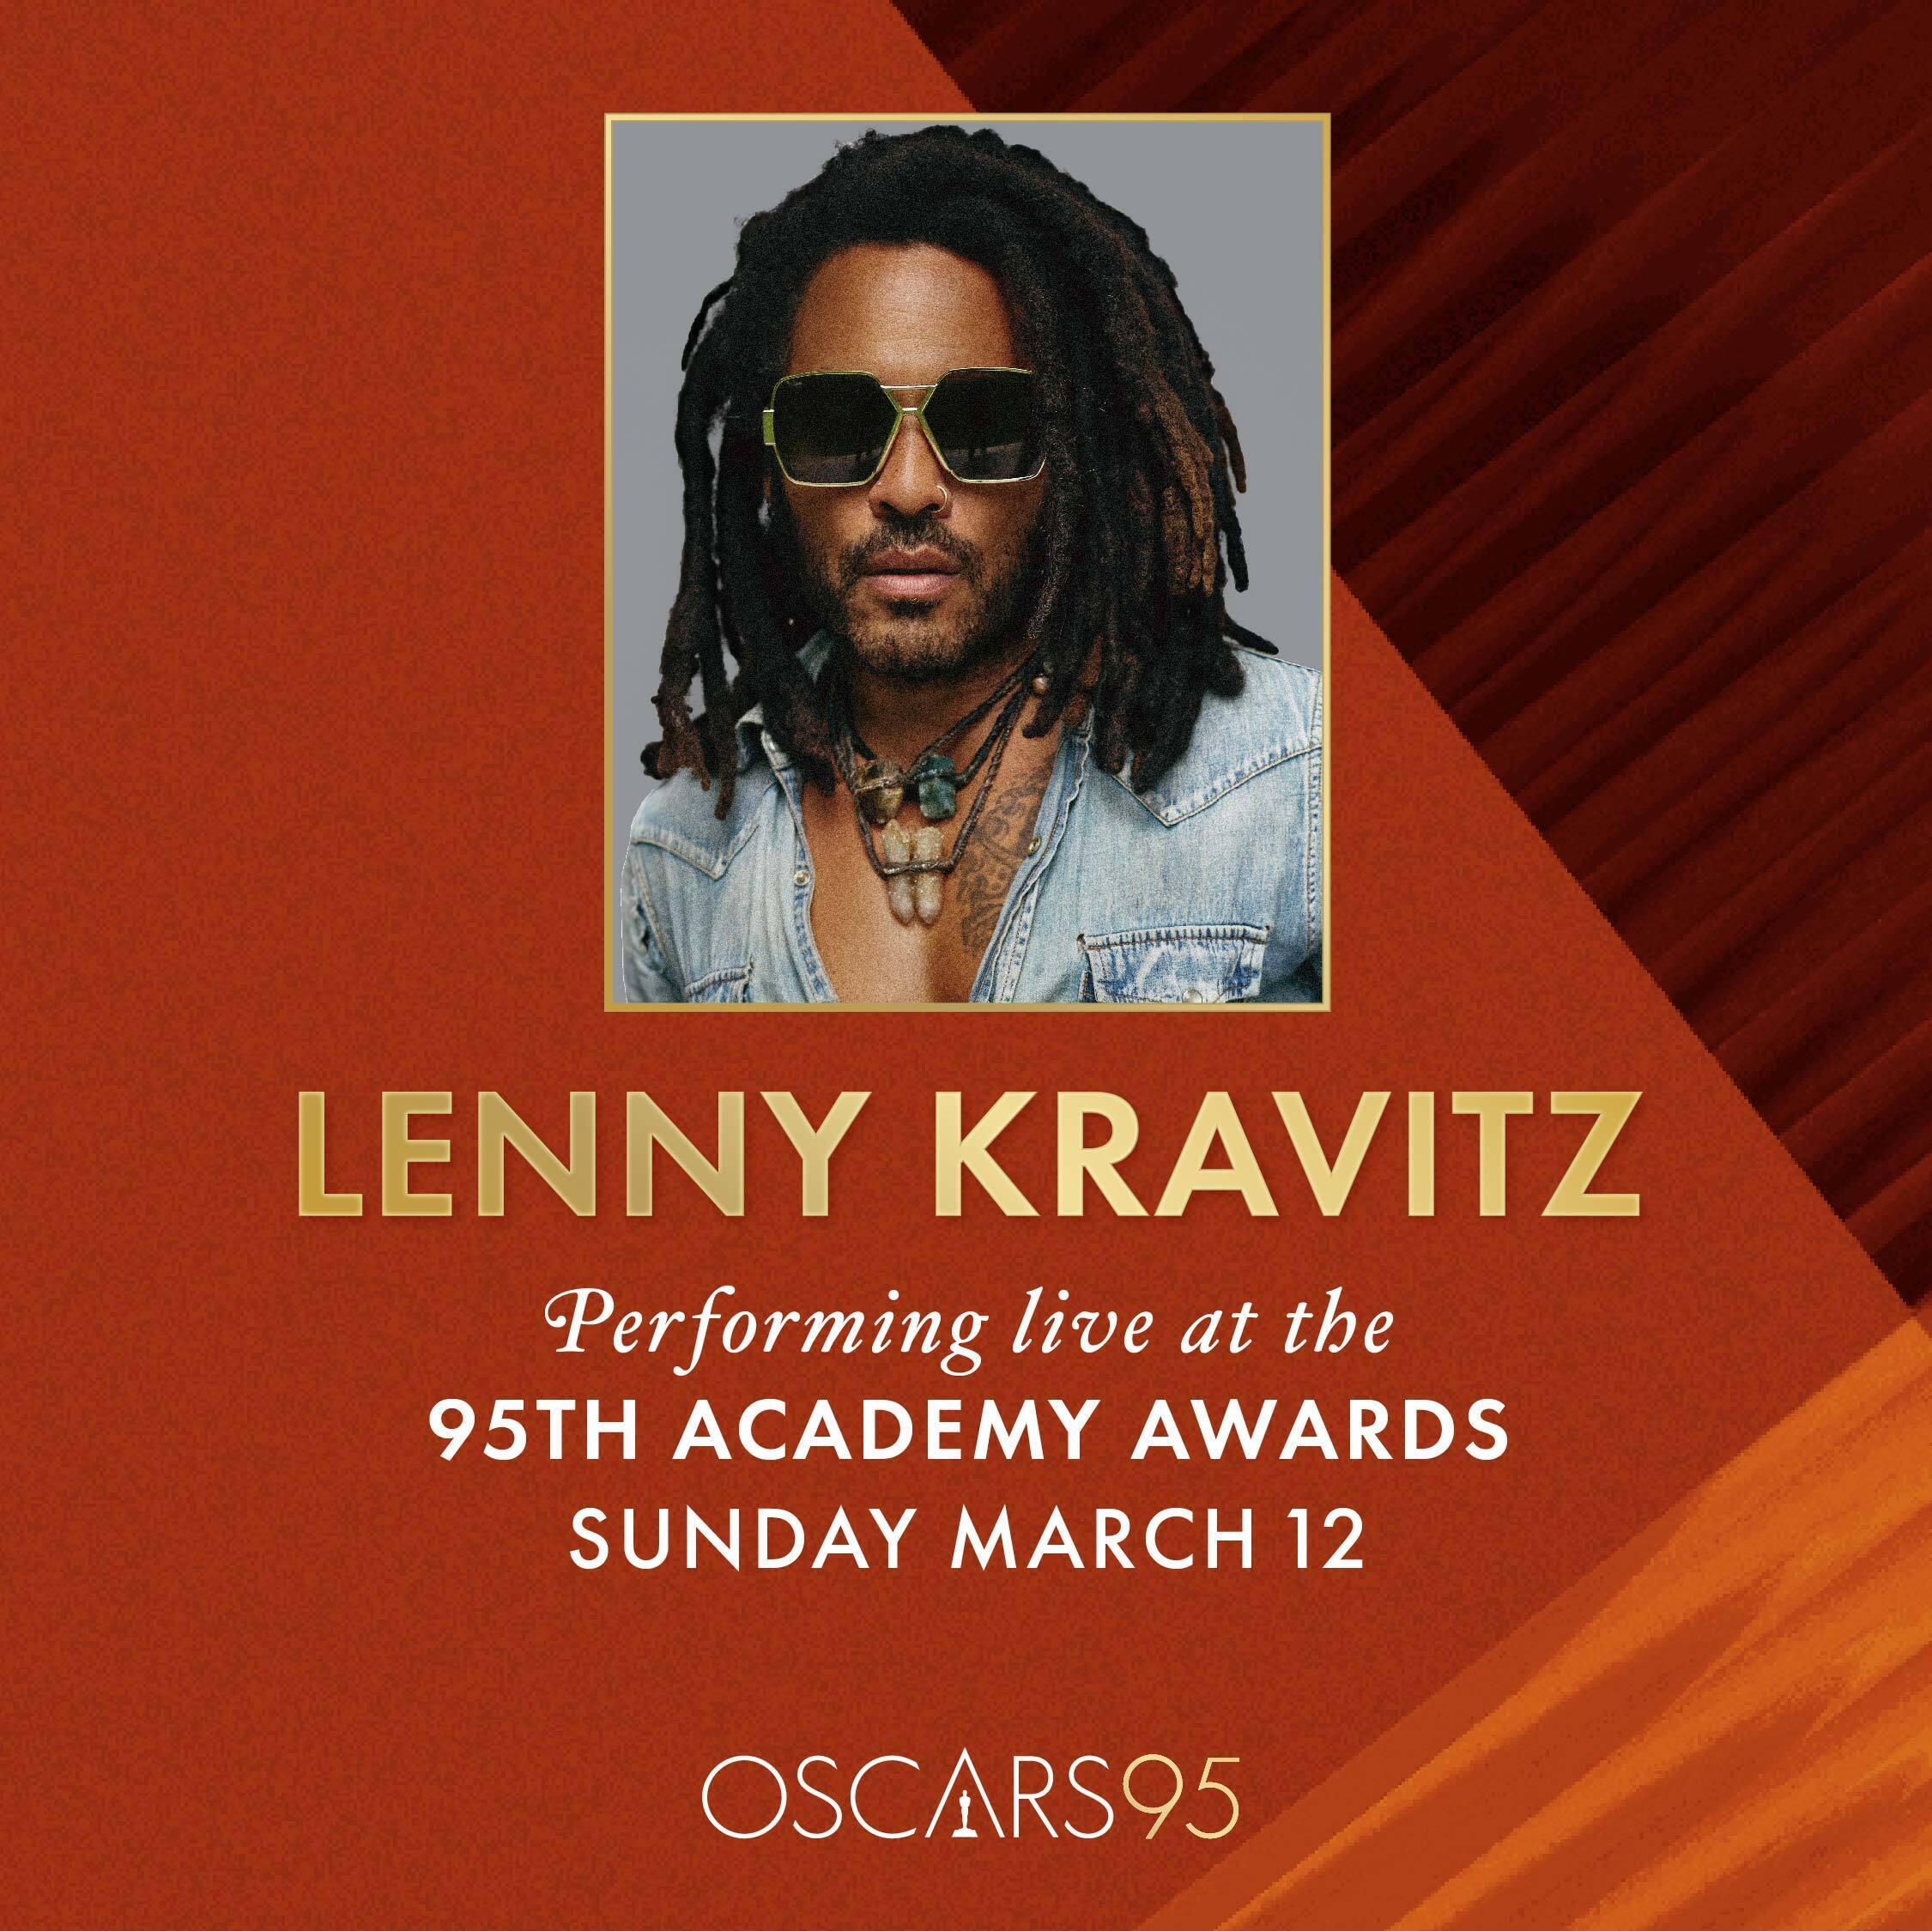 LENNY KRAVITZ TO DELIVER “IN MEMORIAM” PERFORMANCE DURING 95TH OSCARS® 